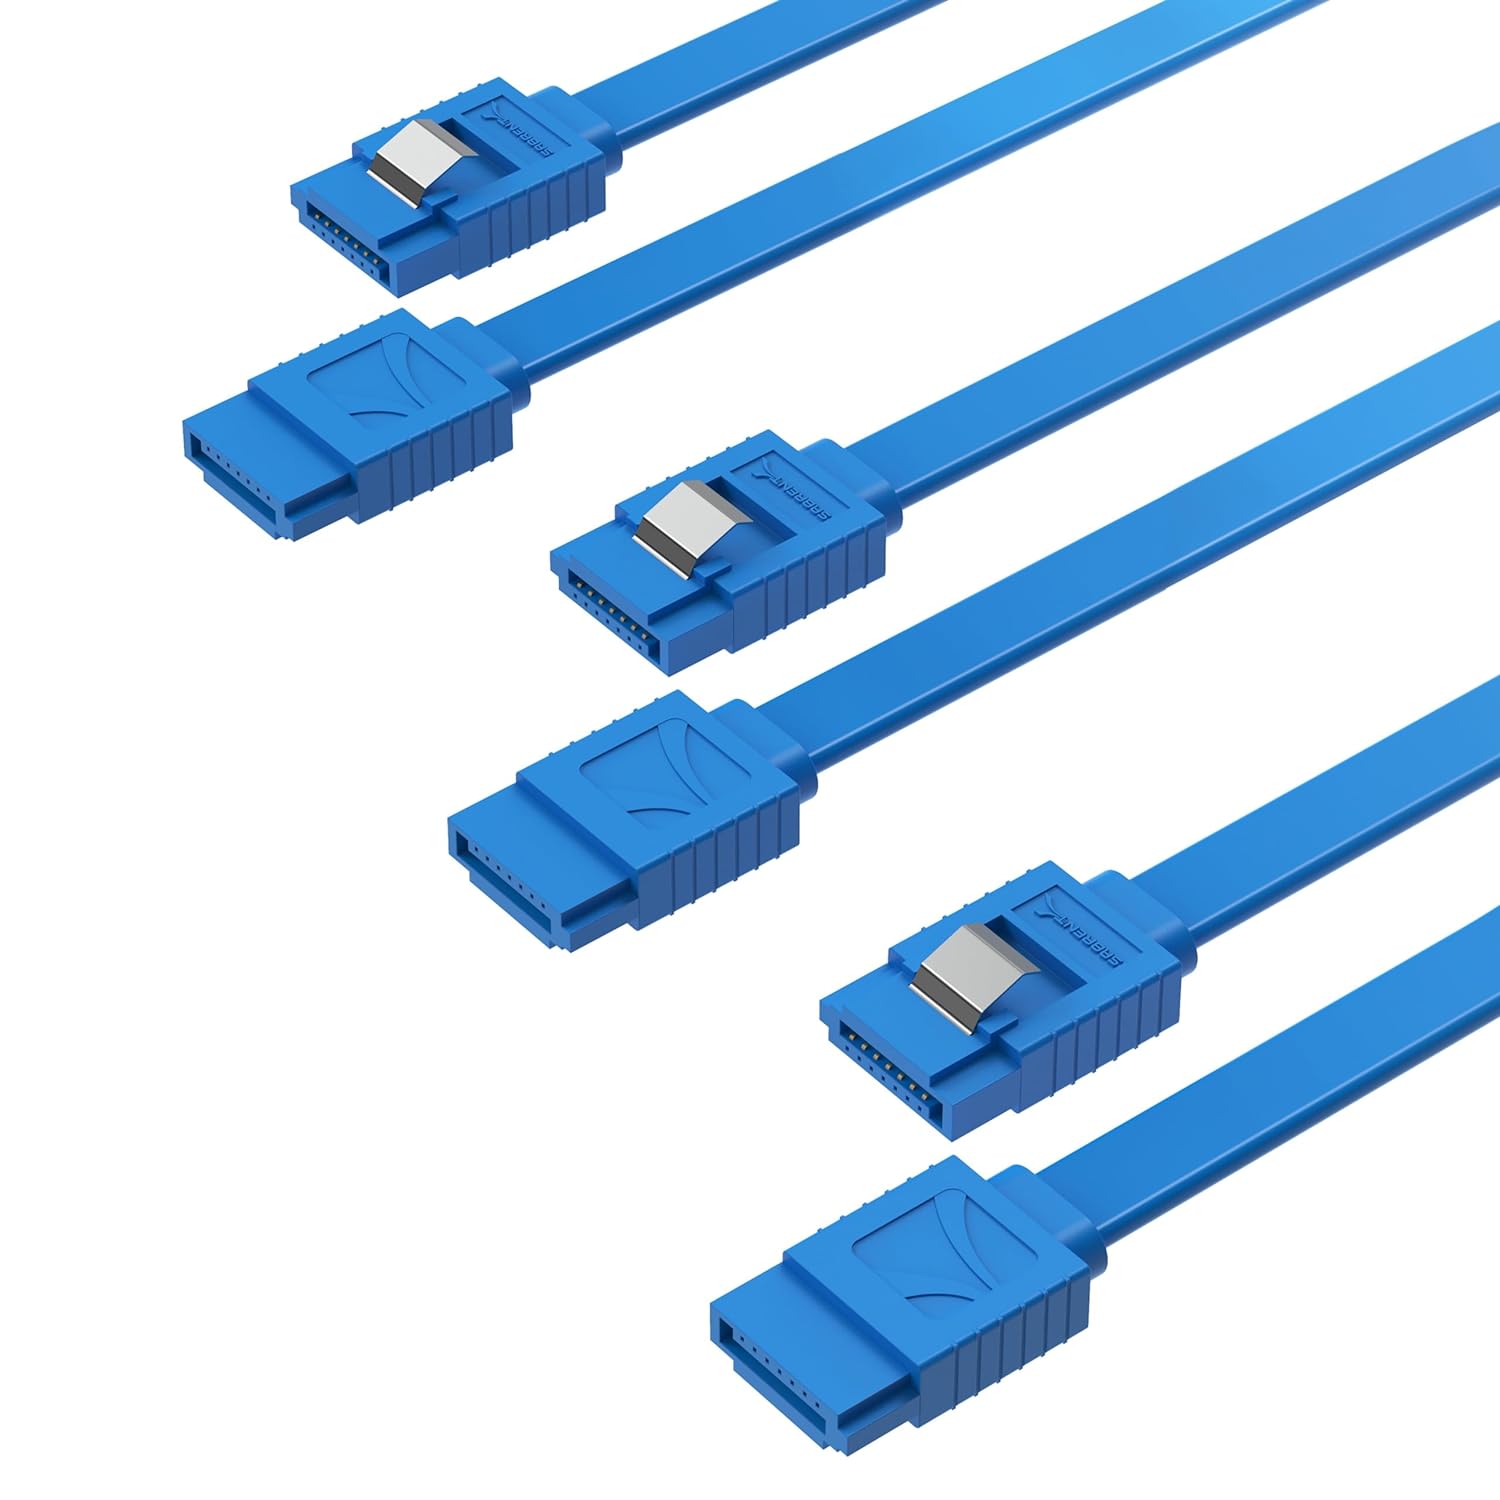 Sabrent SATA III STRAIGHT DATA CABLE WITH LOCKING LATCH 3 Pack CB-SFB3 Blue